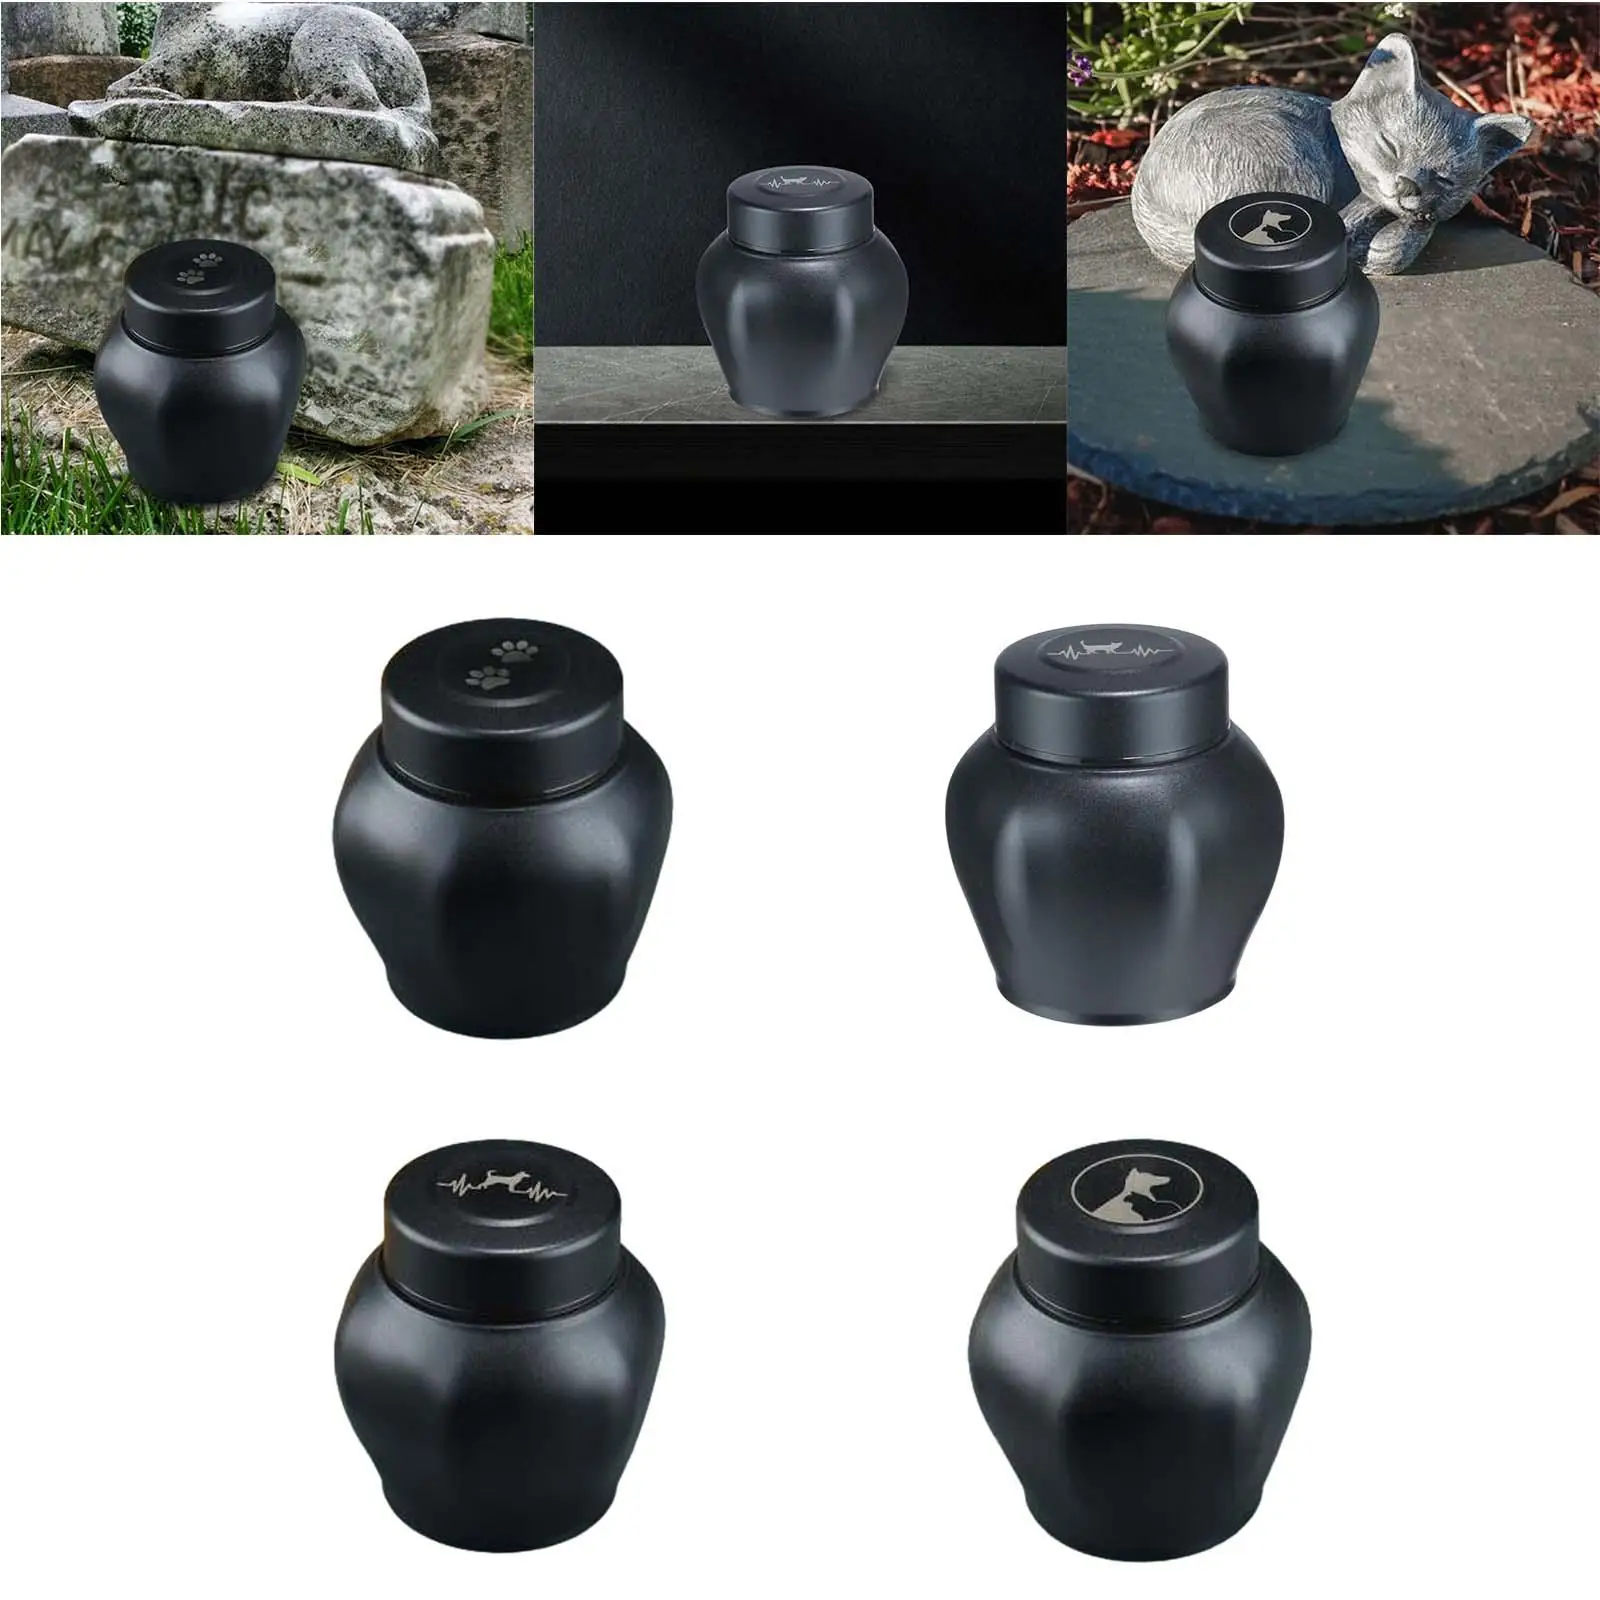 Pet Ash Urn Storage Container Memorial Keepsake Urns Dogs Cats Ash Holder for Puppy Dogs Cats Rabbit Bunny Small Animals